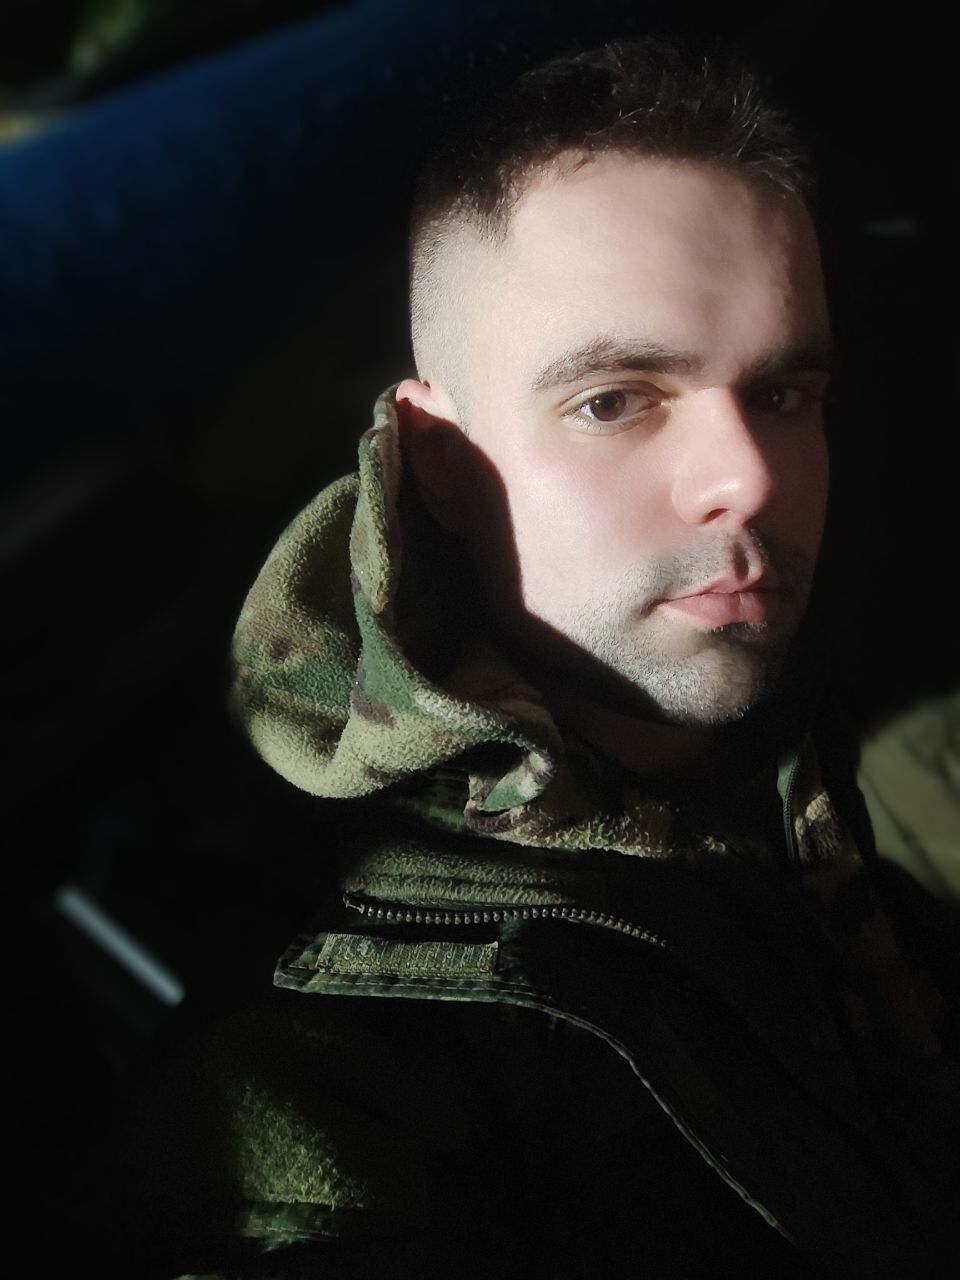 The Armed Forces of Ukraine eliminated the occupant Kozlov, who ran a propaganda channel on Telegram. Photo